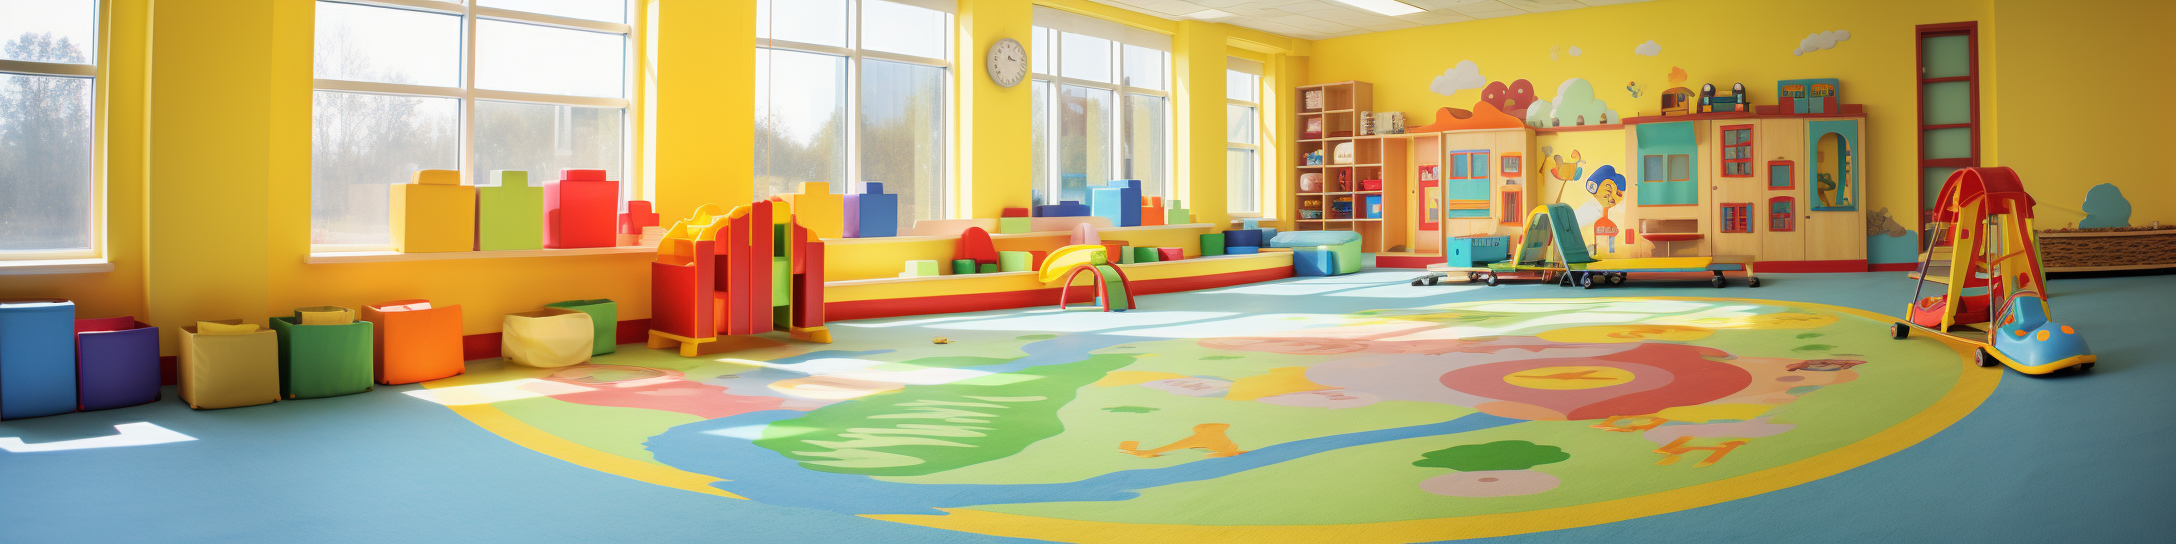 Carpet Cleaning for Daycare Centers: Creating a Clean and Safe Play Environment